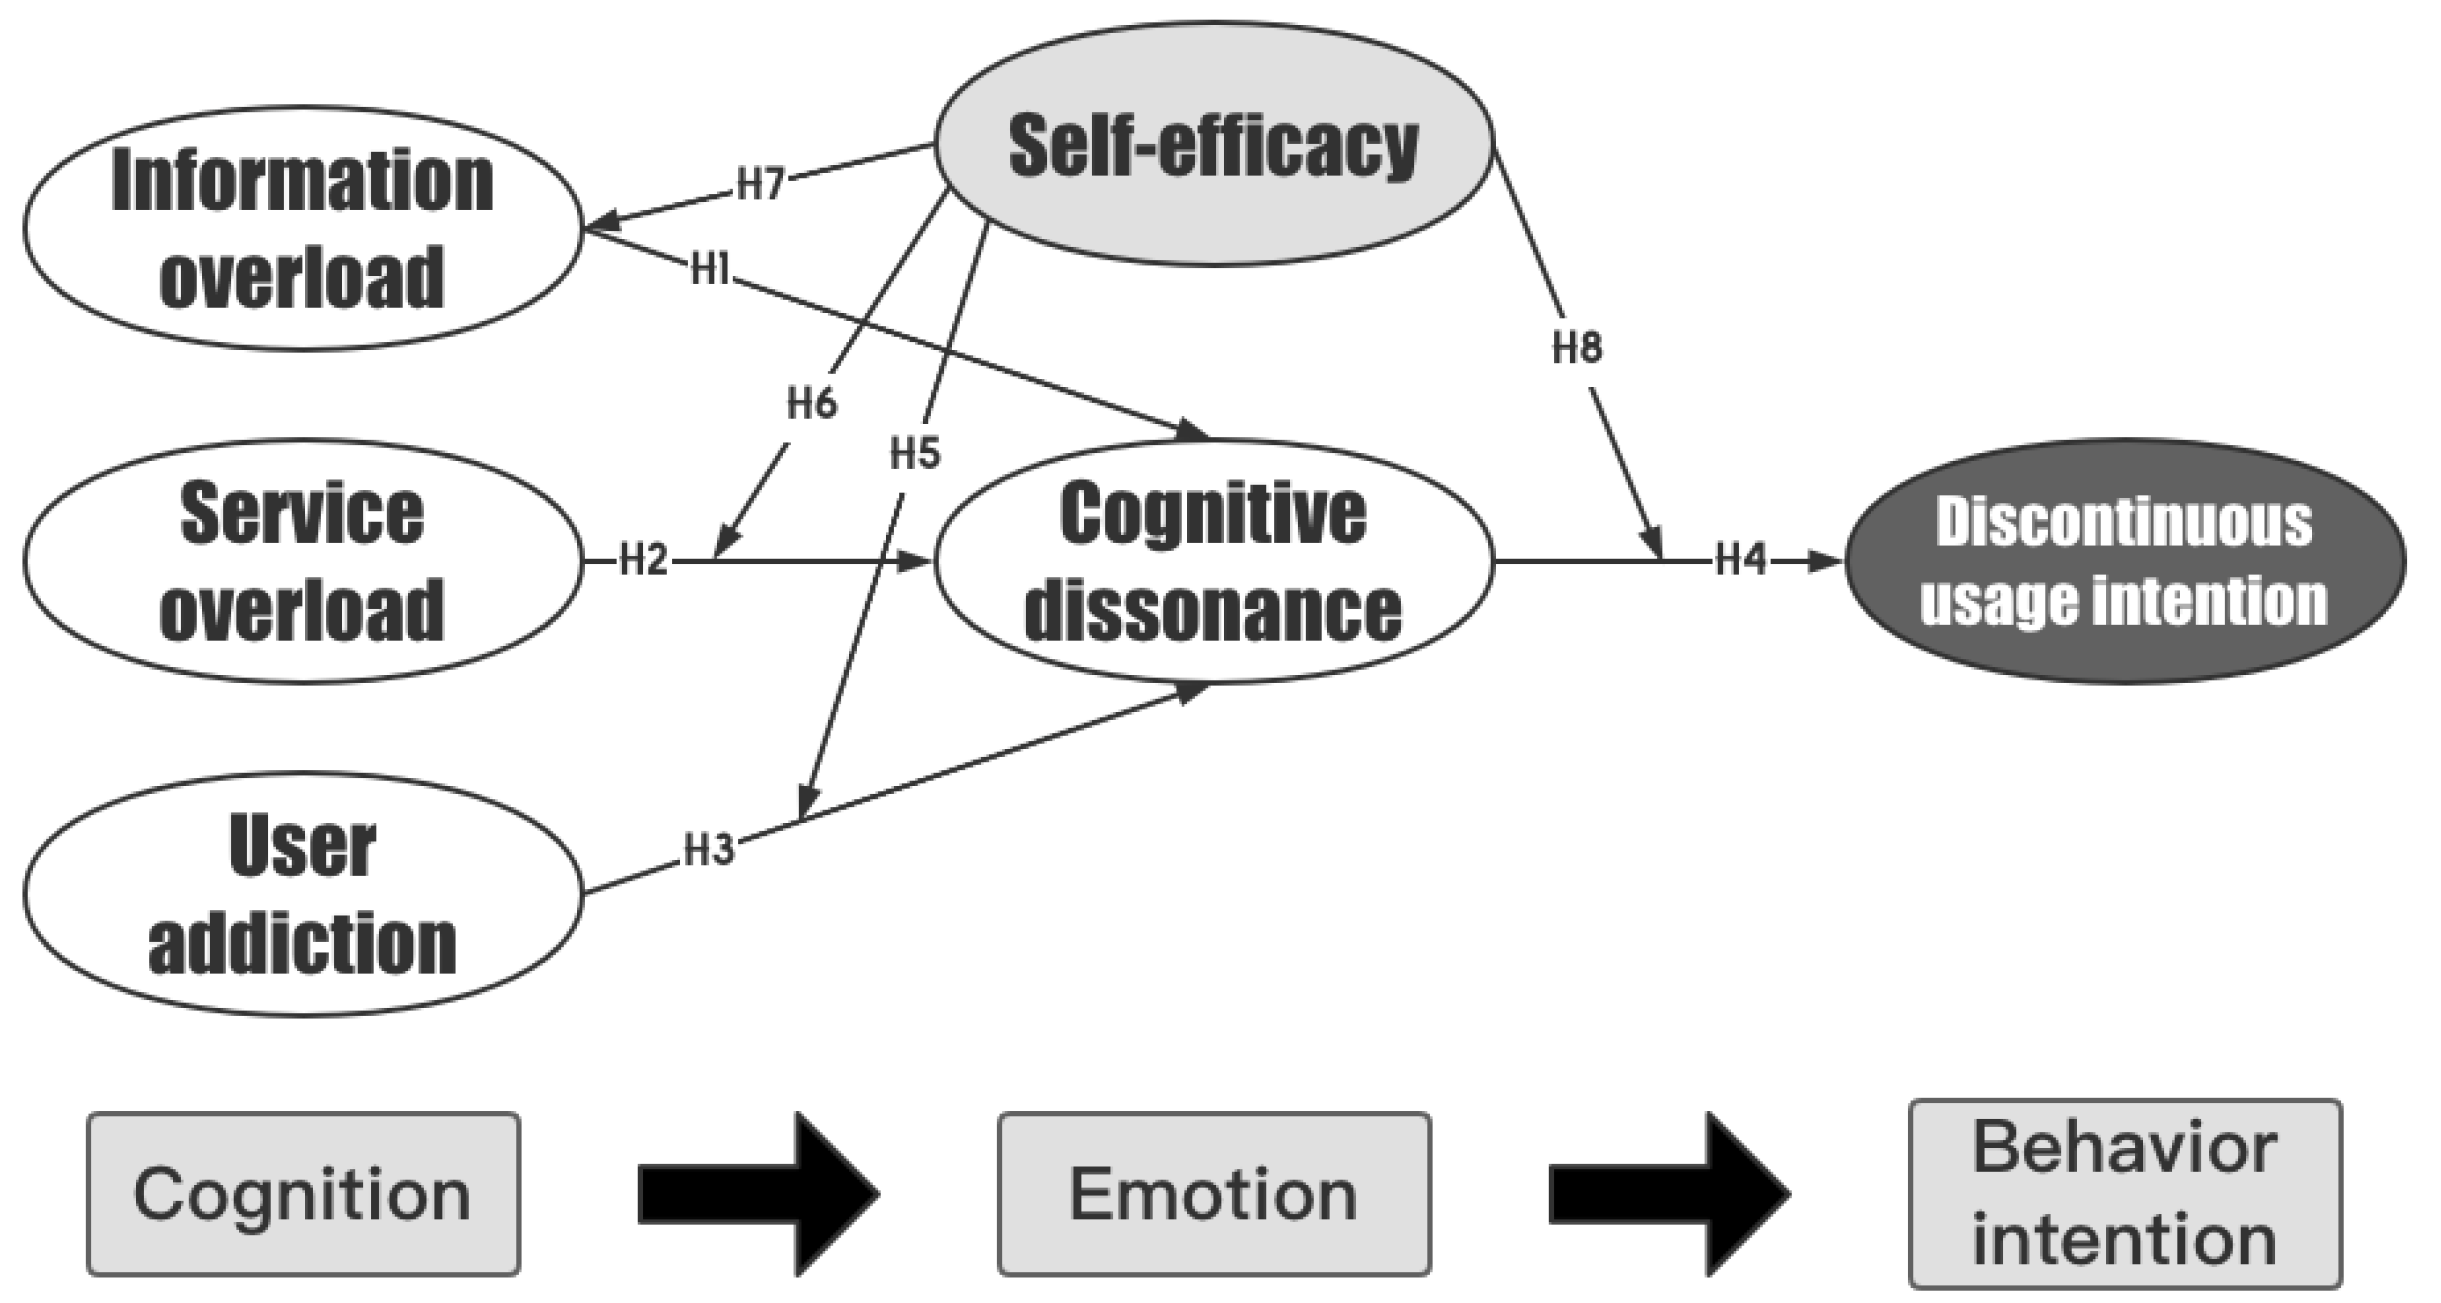 Behavioral Sciences Free Full-Text Mind over Matter Examining the Role of Cognitive Dissonance and Self-Efficacy in Discontinuous Usage Intentions on Pan-Entertainment Mobile Live Broadcast Platforms